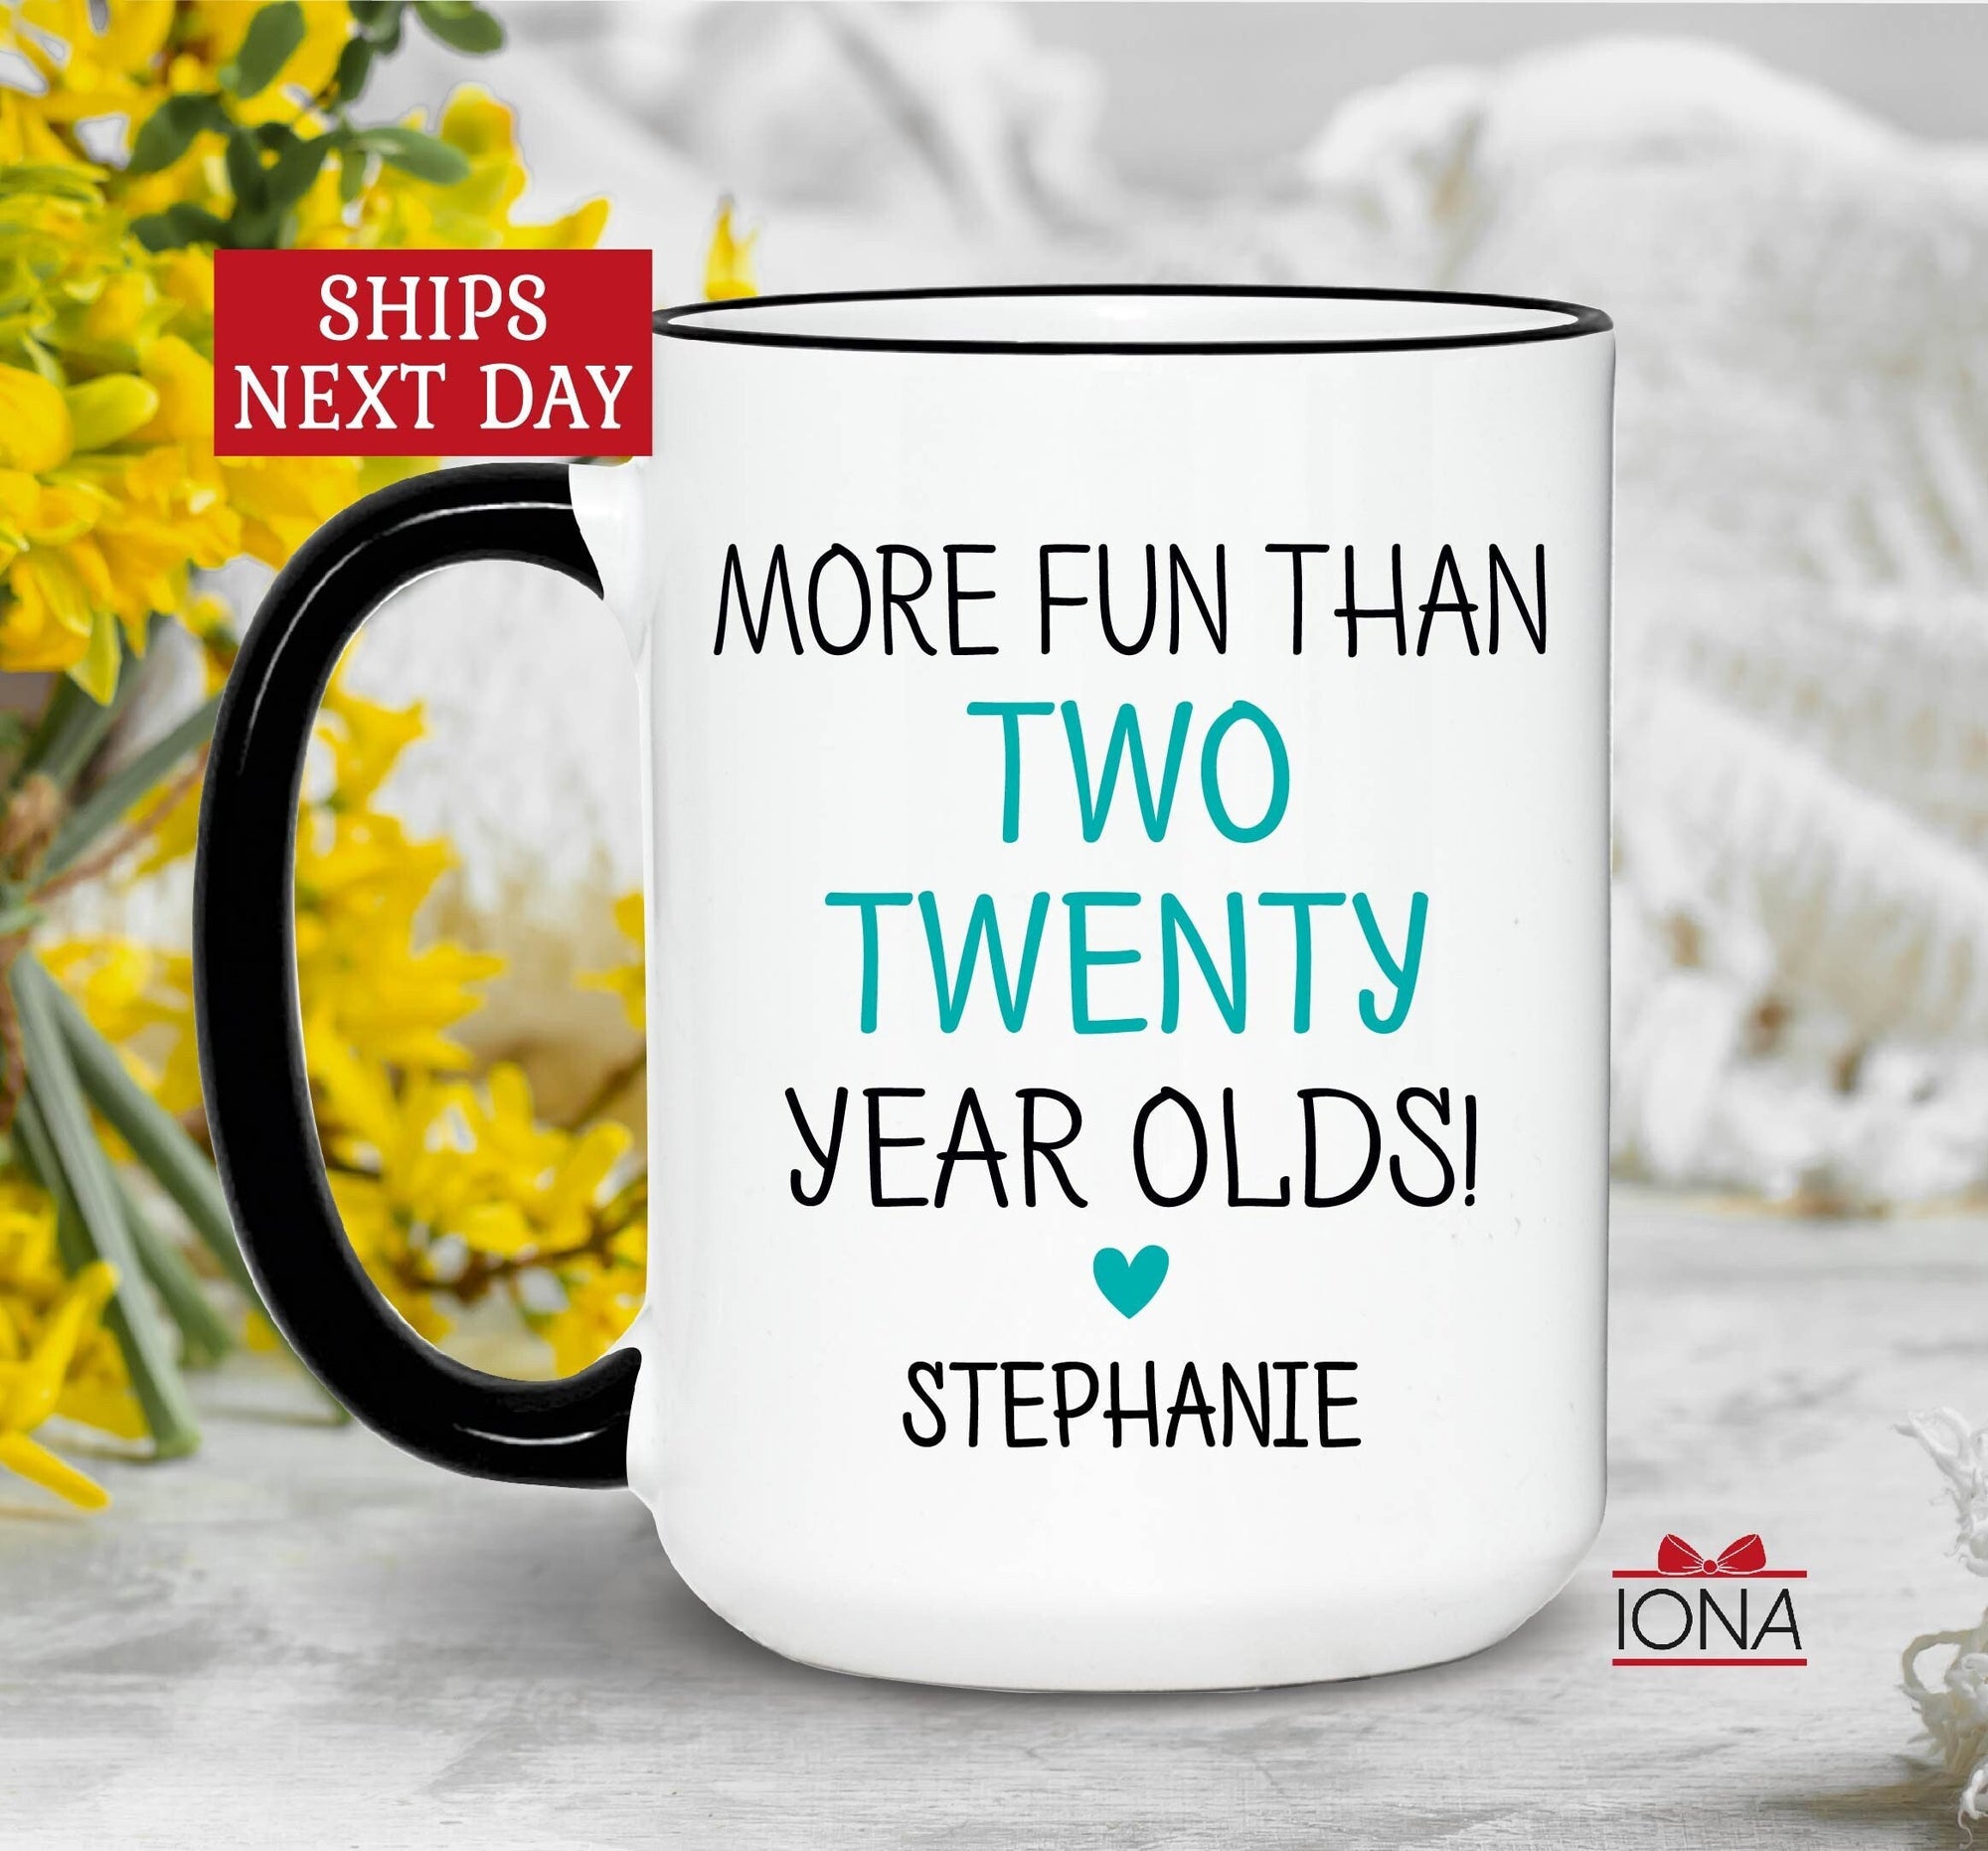 Personalized 40th Birthday Gift, Forty Birthday Coffee Mug, 40th birthday best friend gifts for women, More fun than two twenty Year Olds